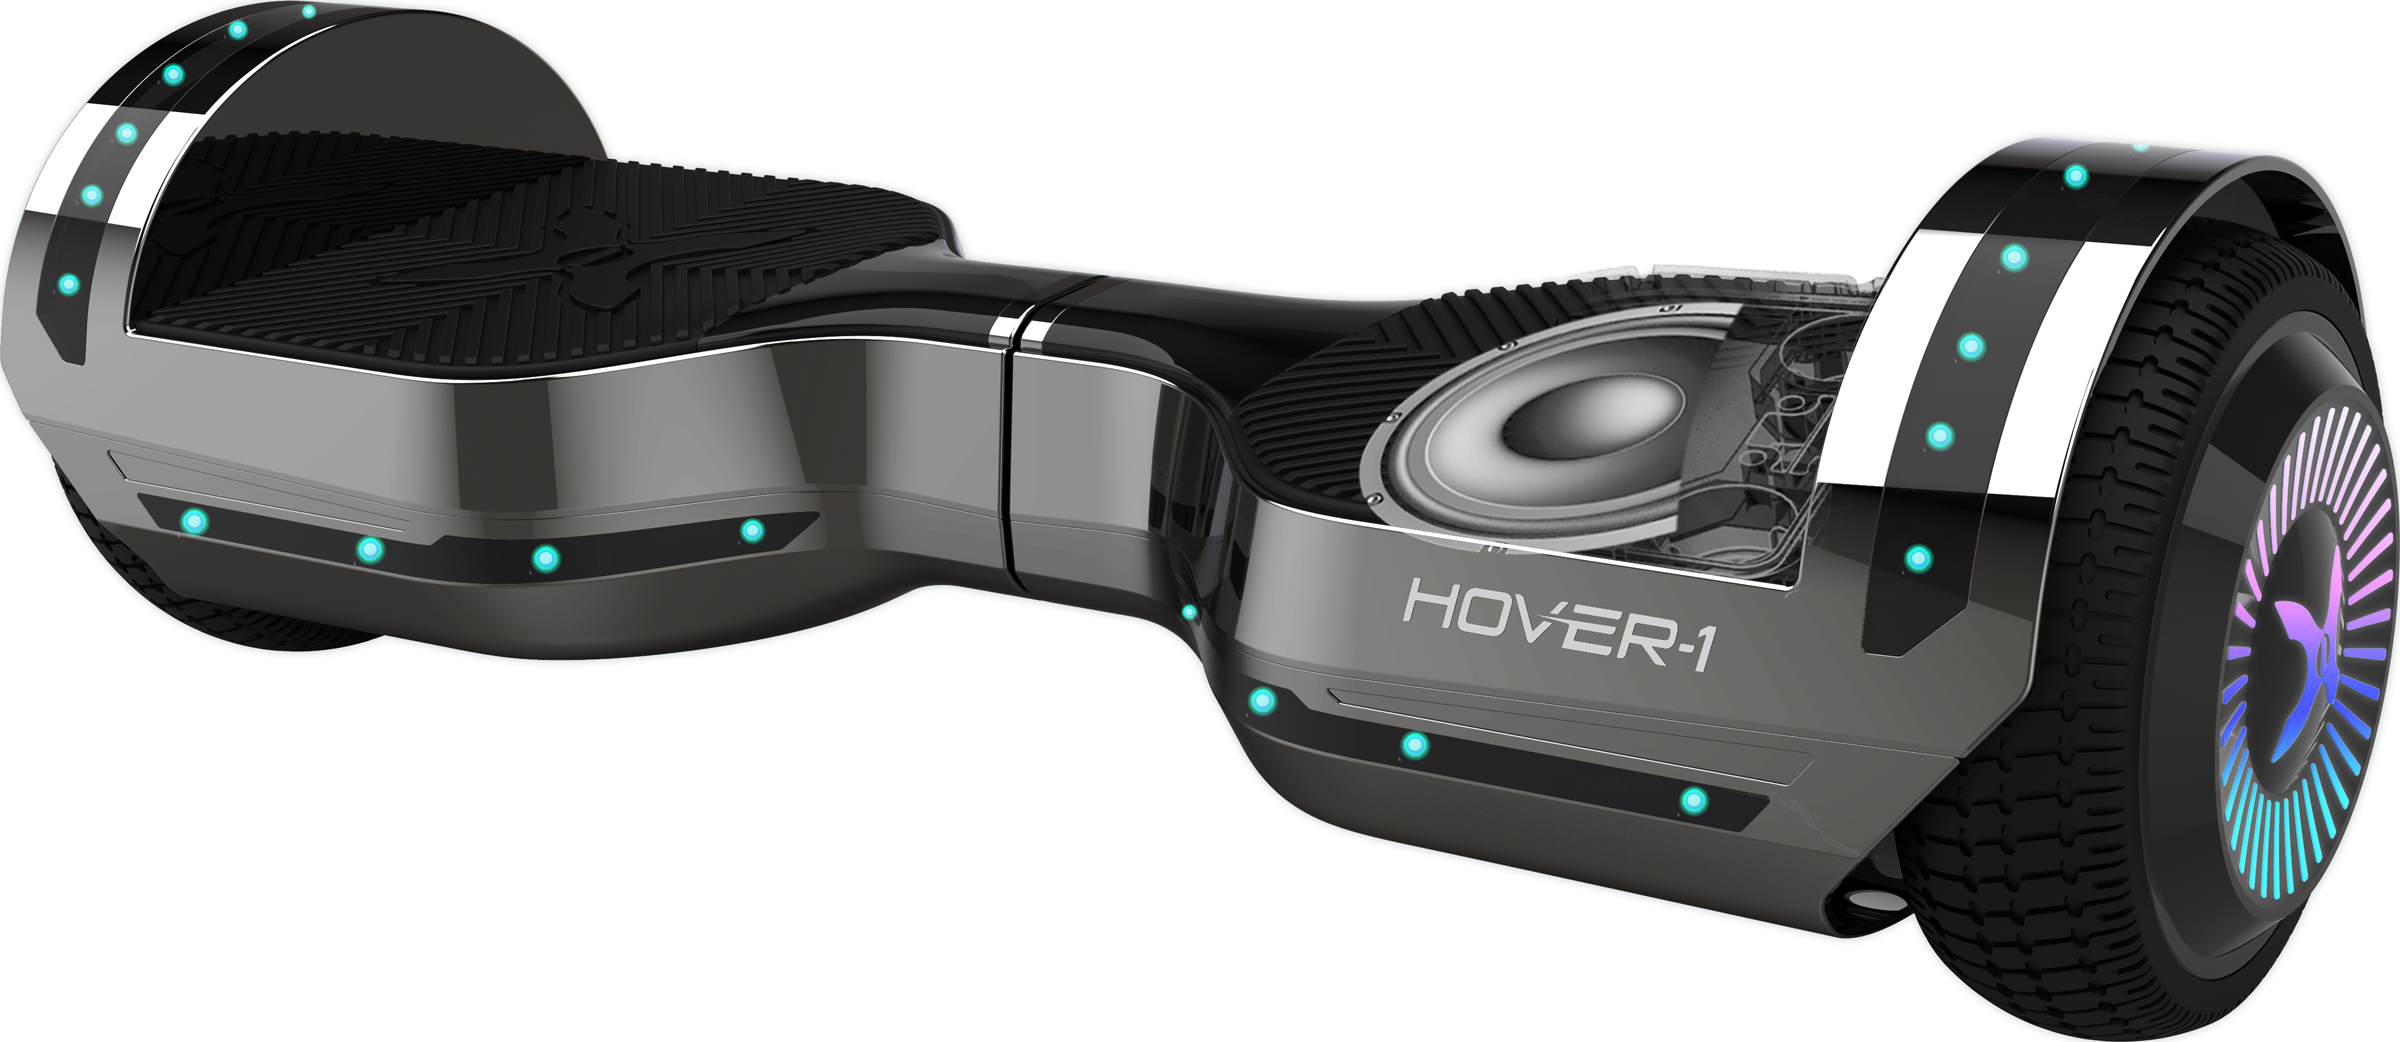 Hover-1 Chrome 7 Mph Hoverboard with LED Lights and Bluetooth Speaker, 6.5 In. Tires, 220 Lbs. Max Weight, Gunmetal - image 3 of 8